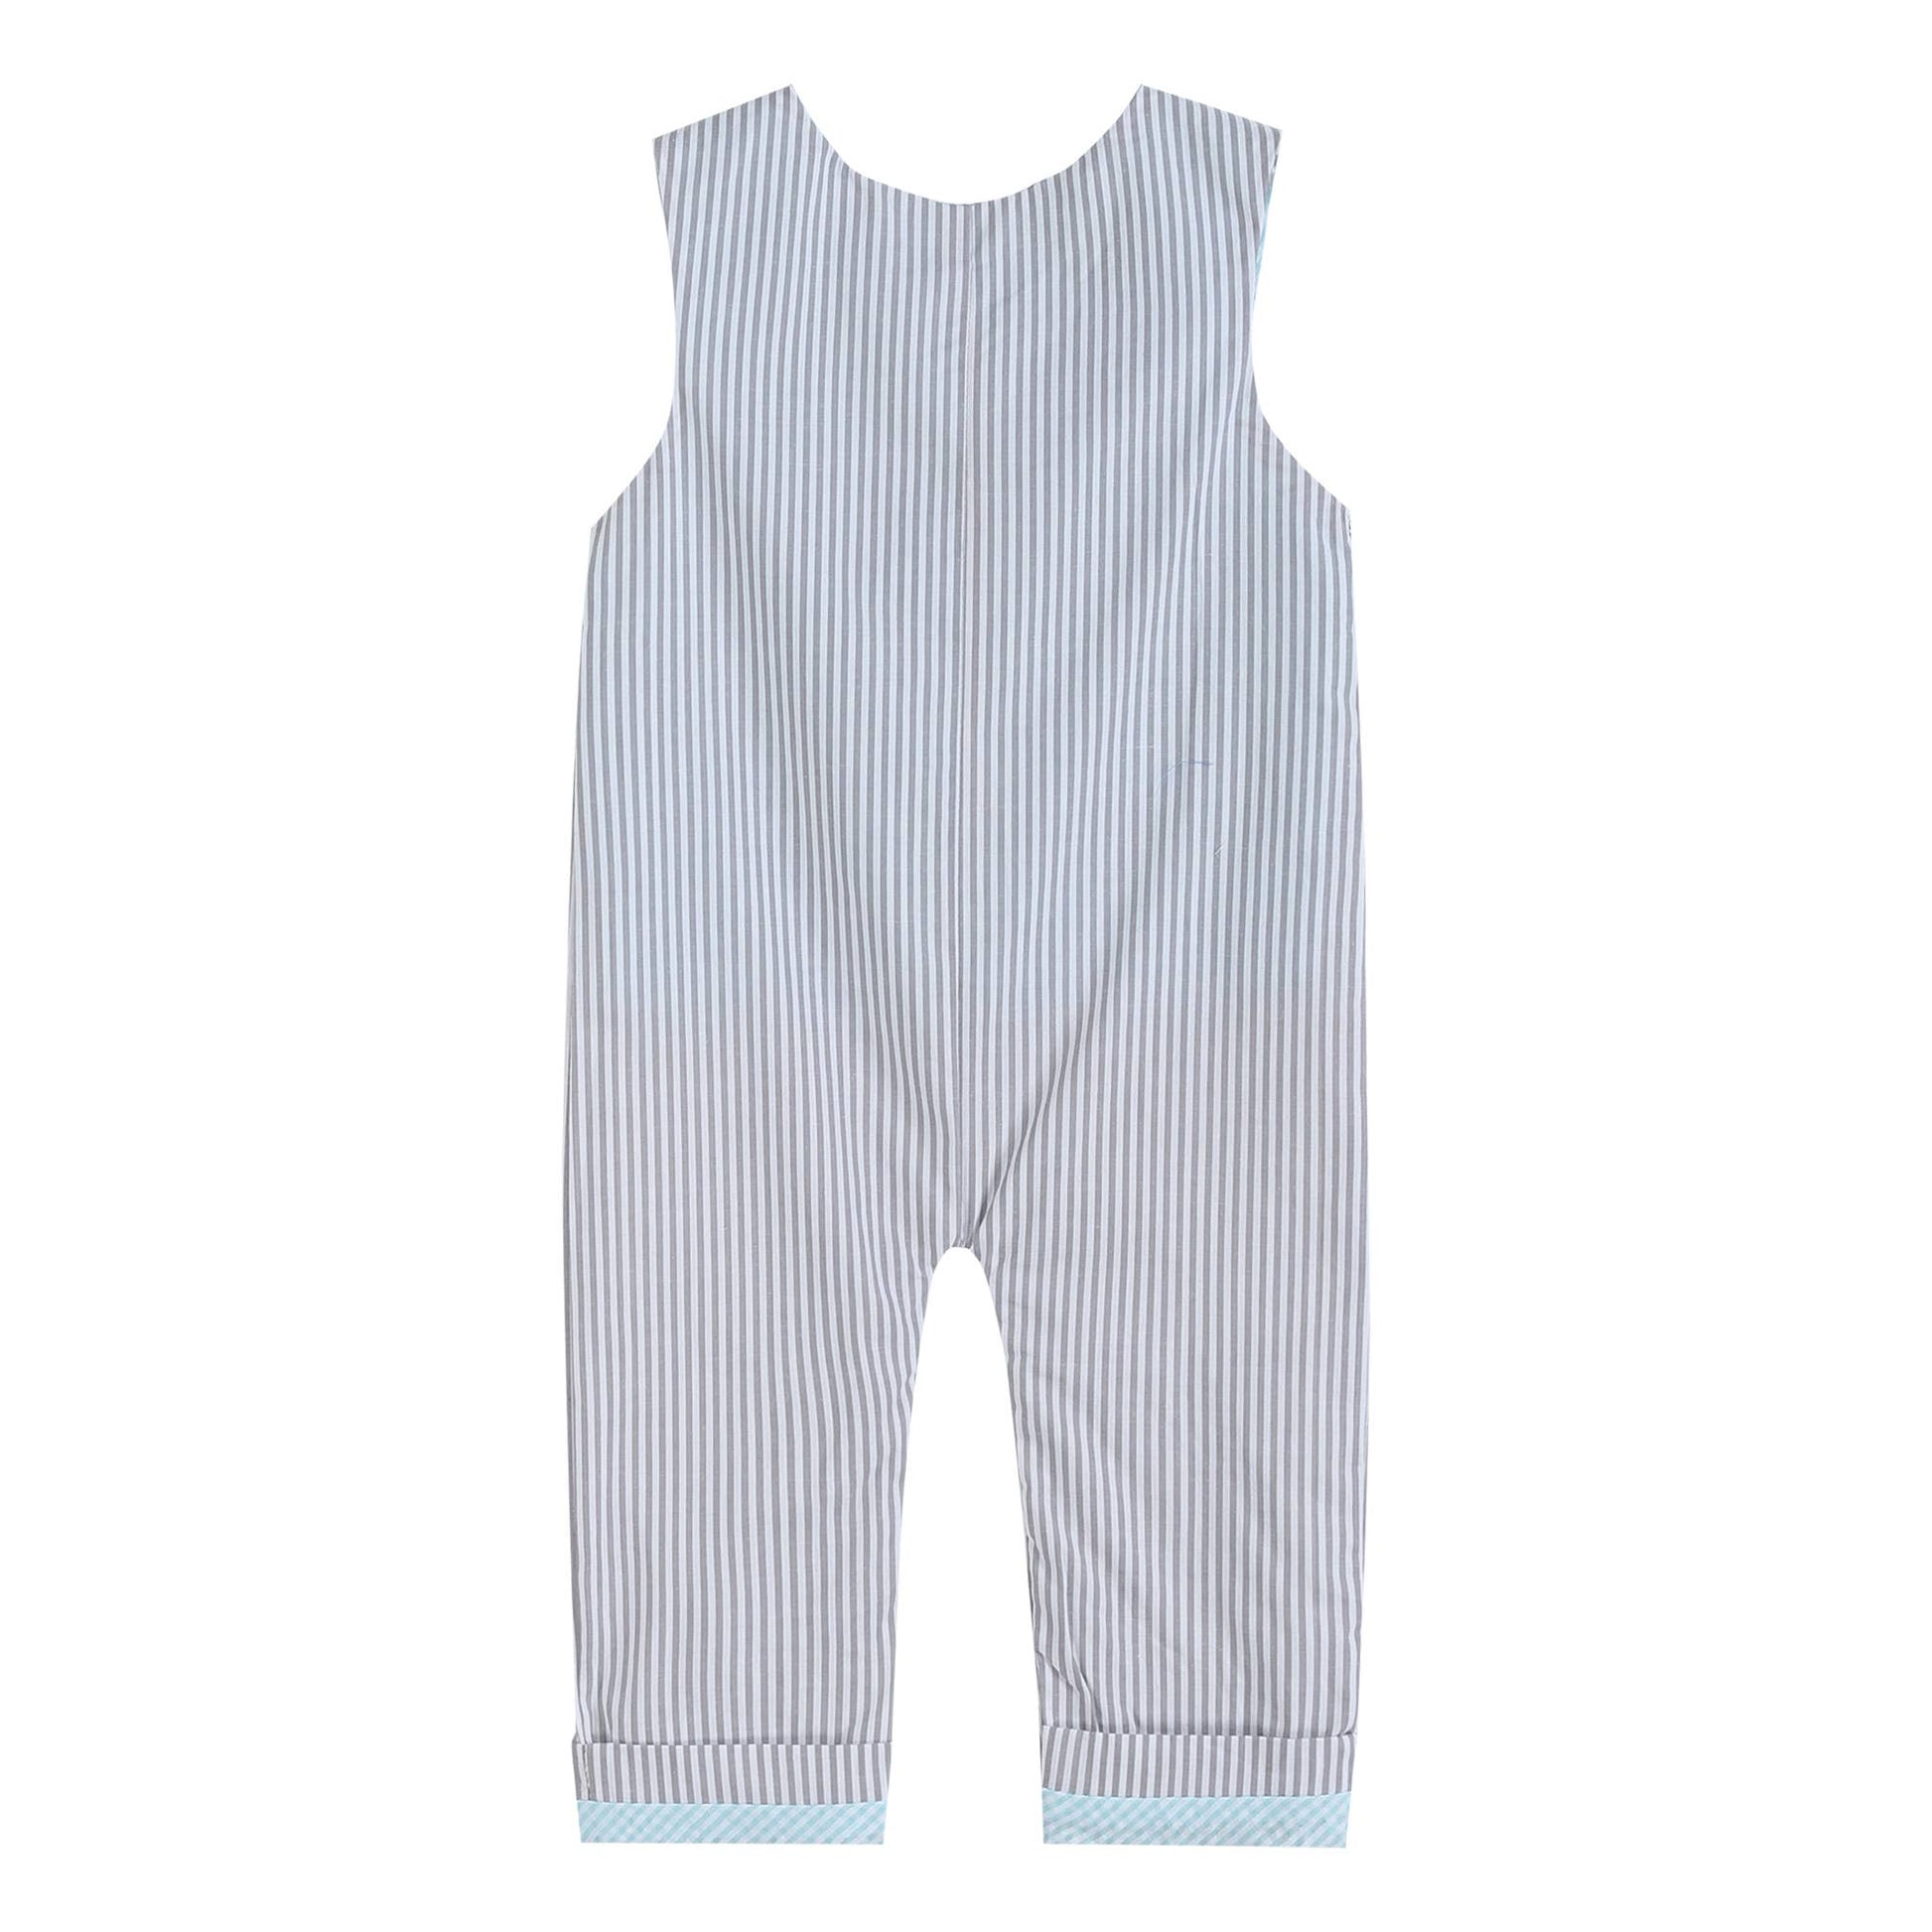 An adorable Lil Cactus baby boy's romper in soft cotton, featuring cute details and gray and blue stripes.